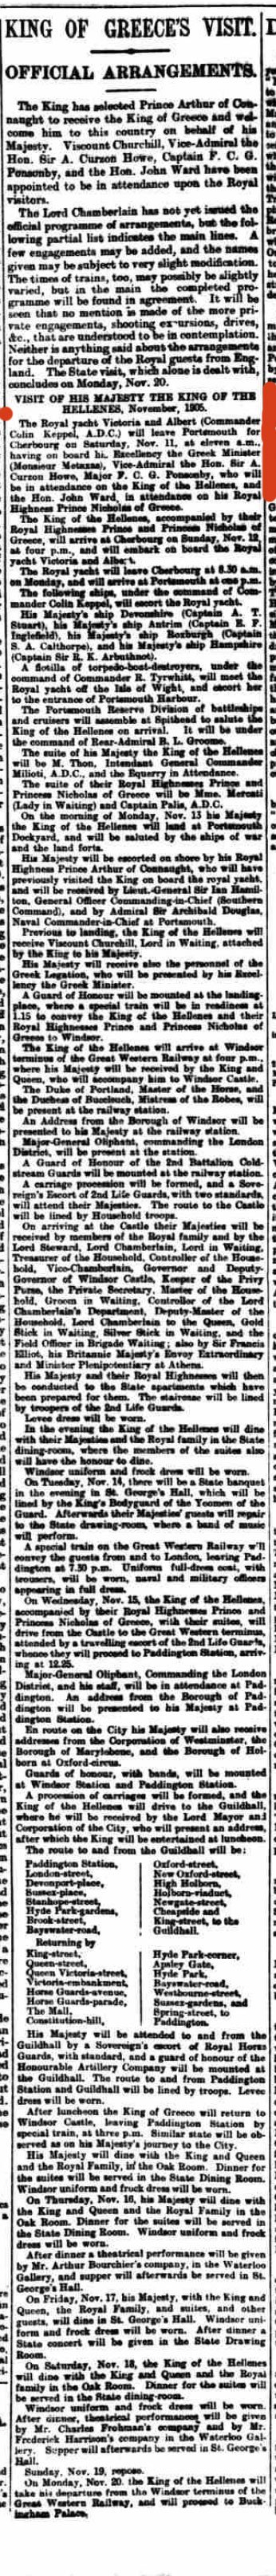 The Daily Telegraph & Courier (London) 9th November 1905.jpg